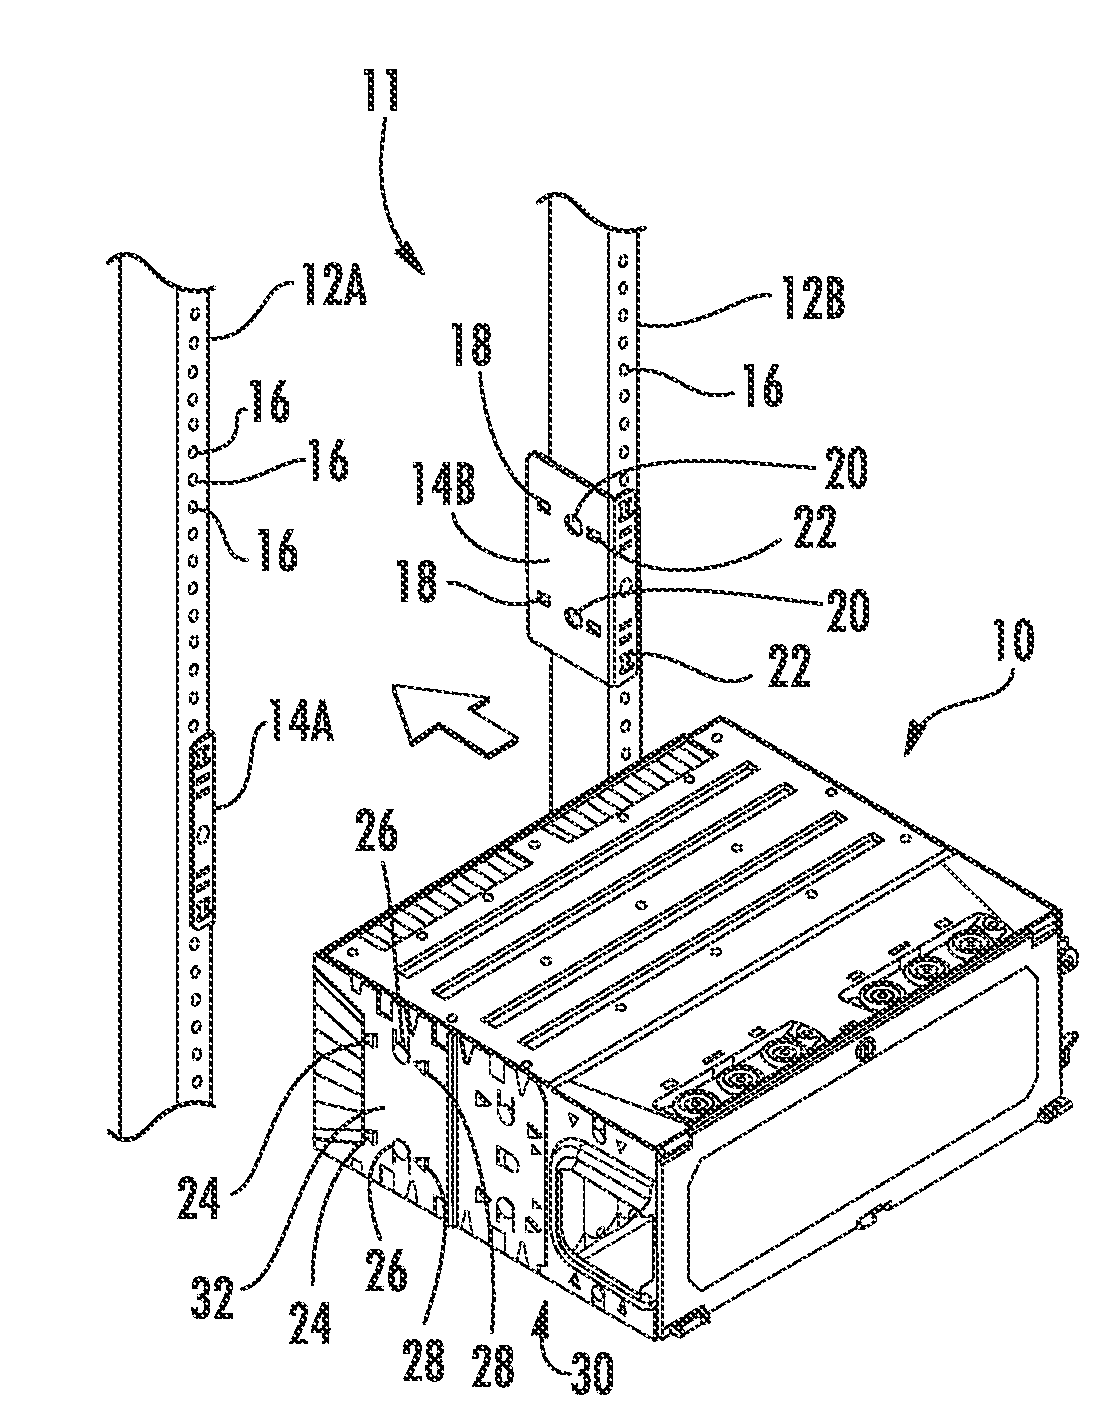 Removable fiber management sections for fiber optic housings, and related components and methods